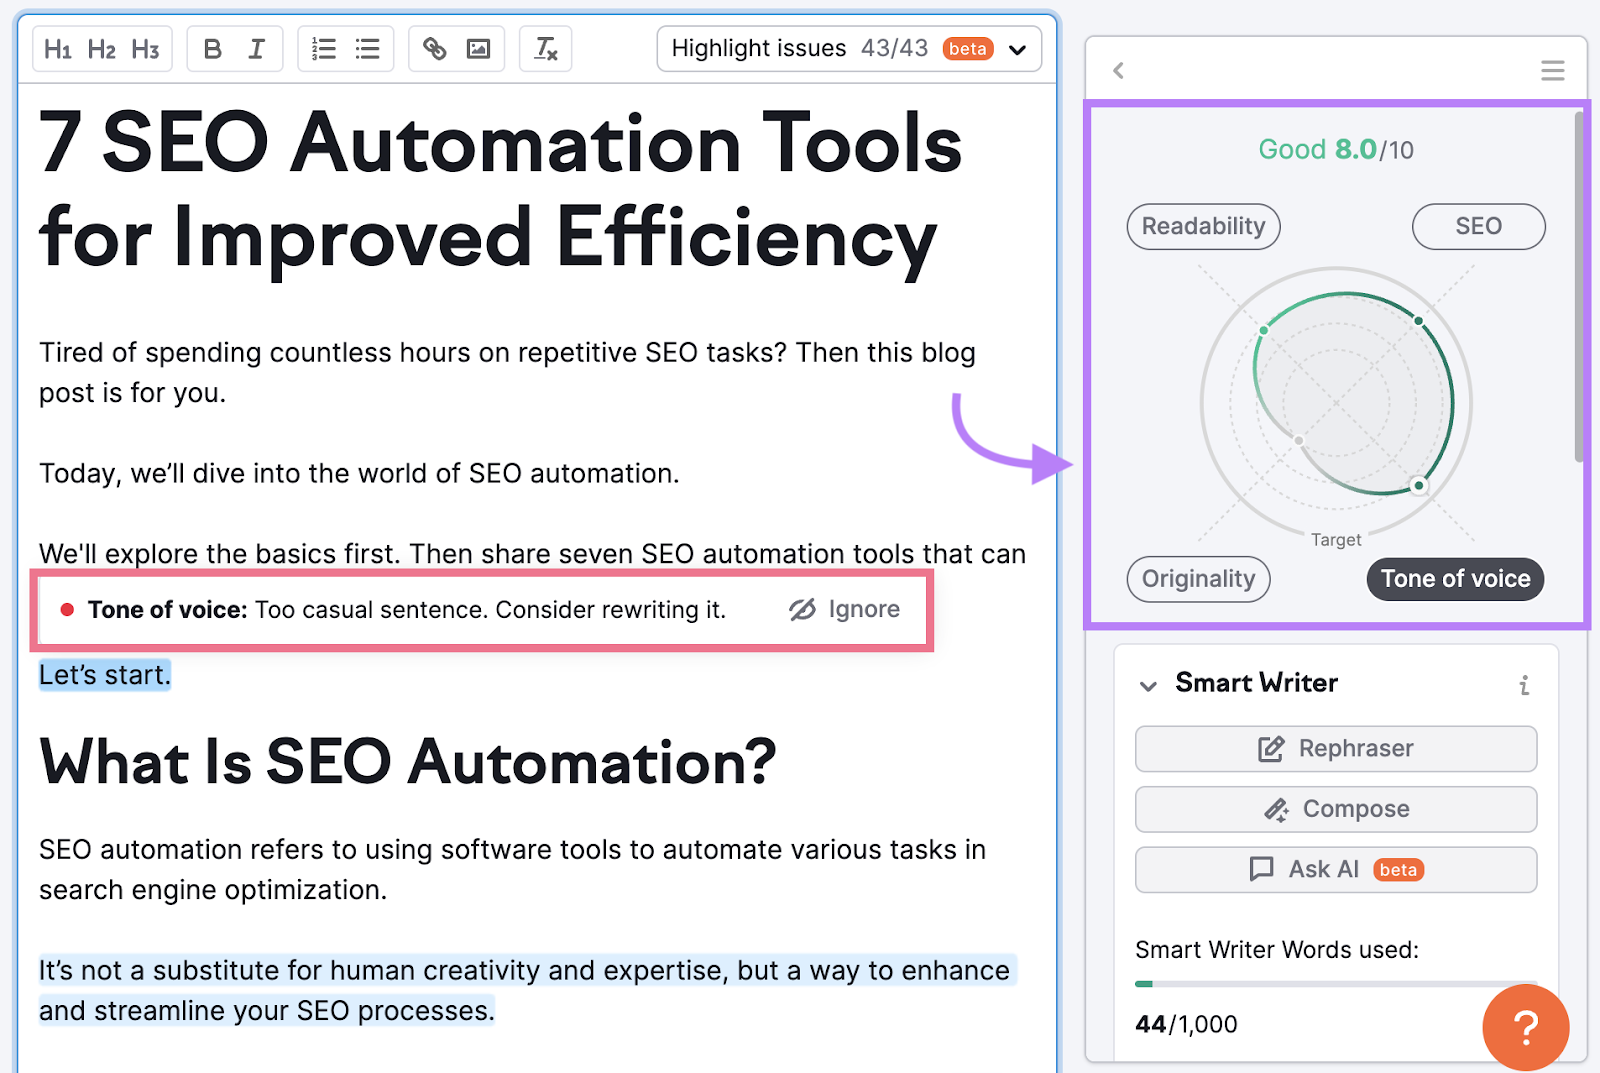 SEO Writing Assistant analyses your content and provides recommendations